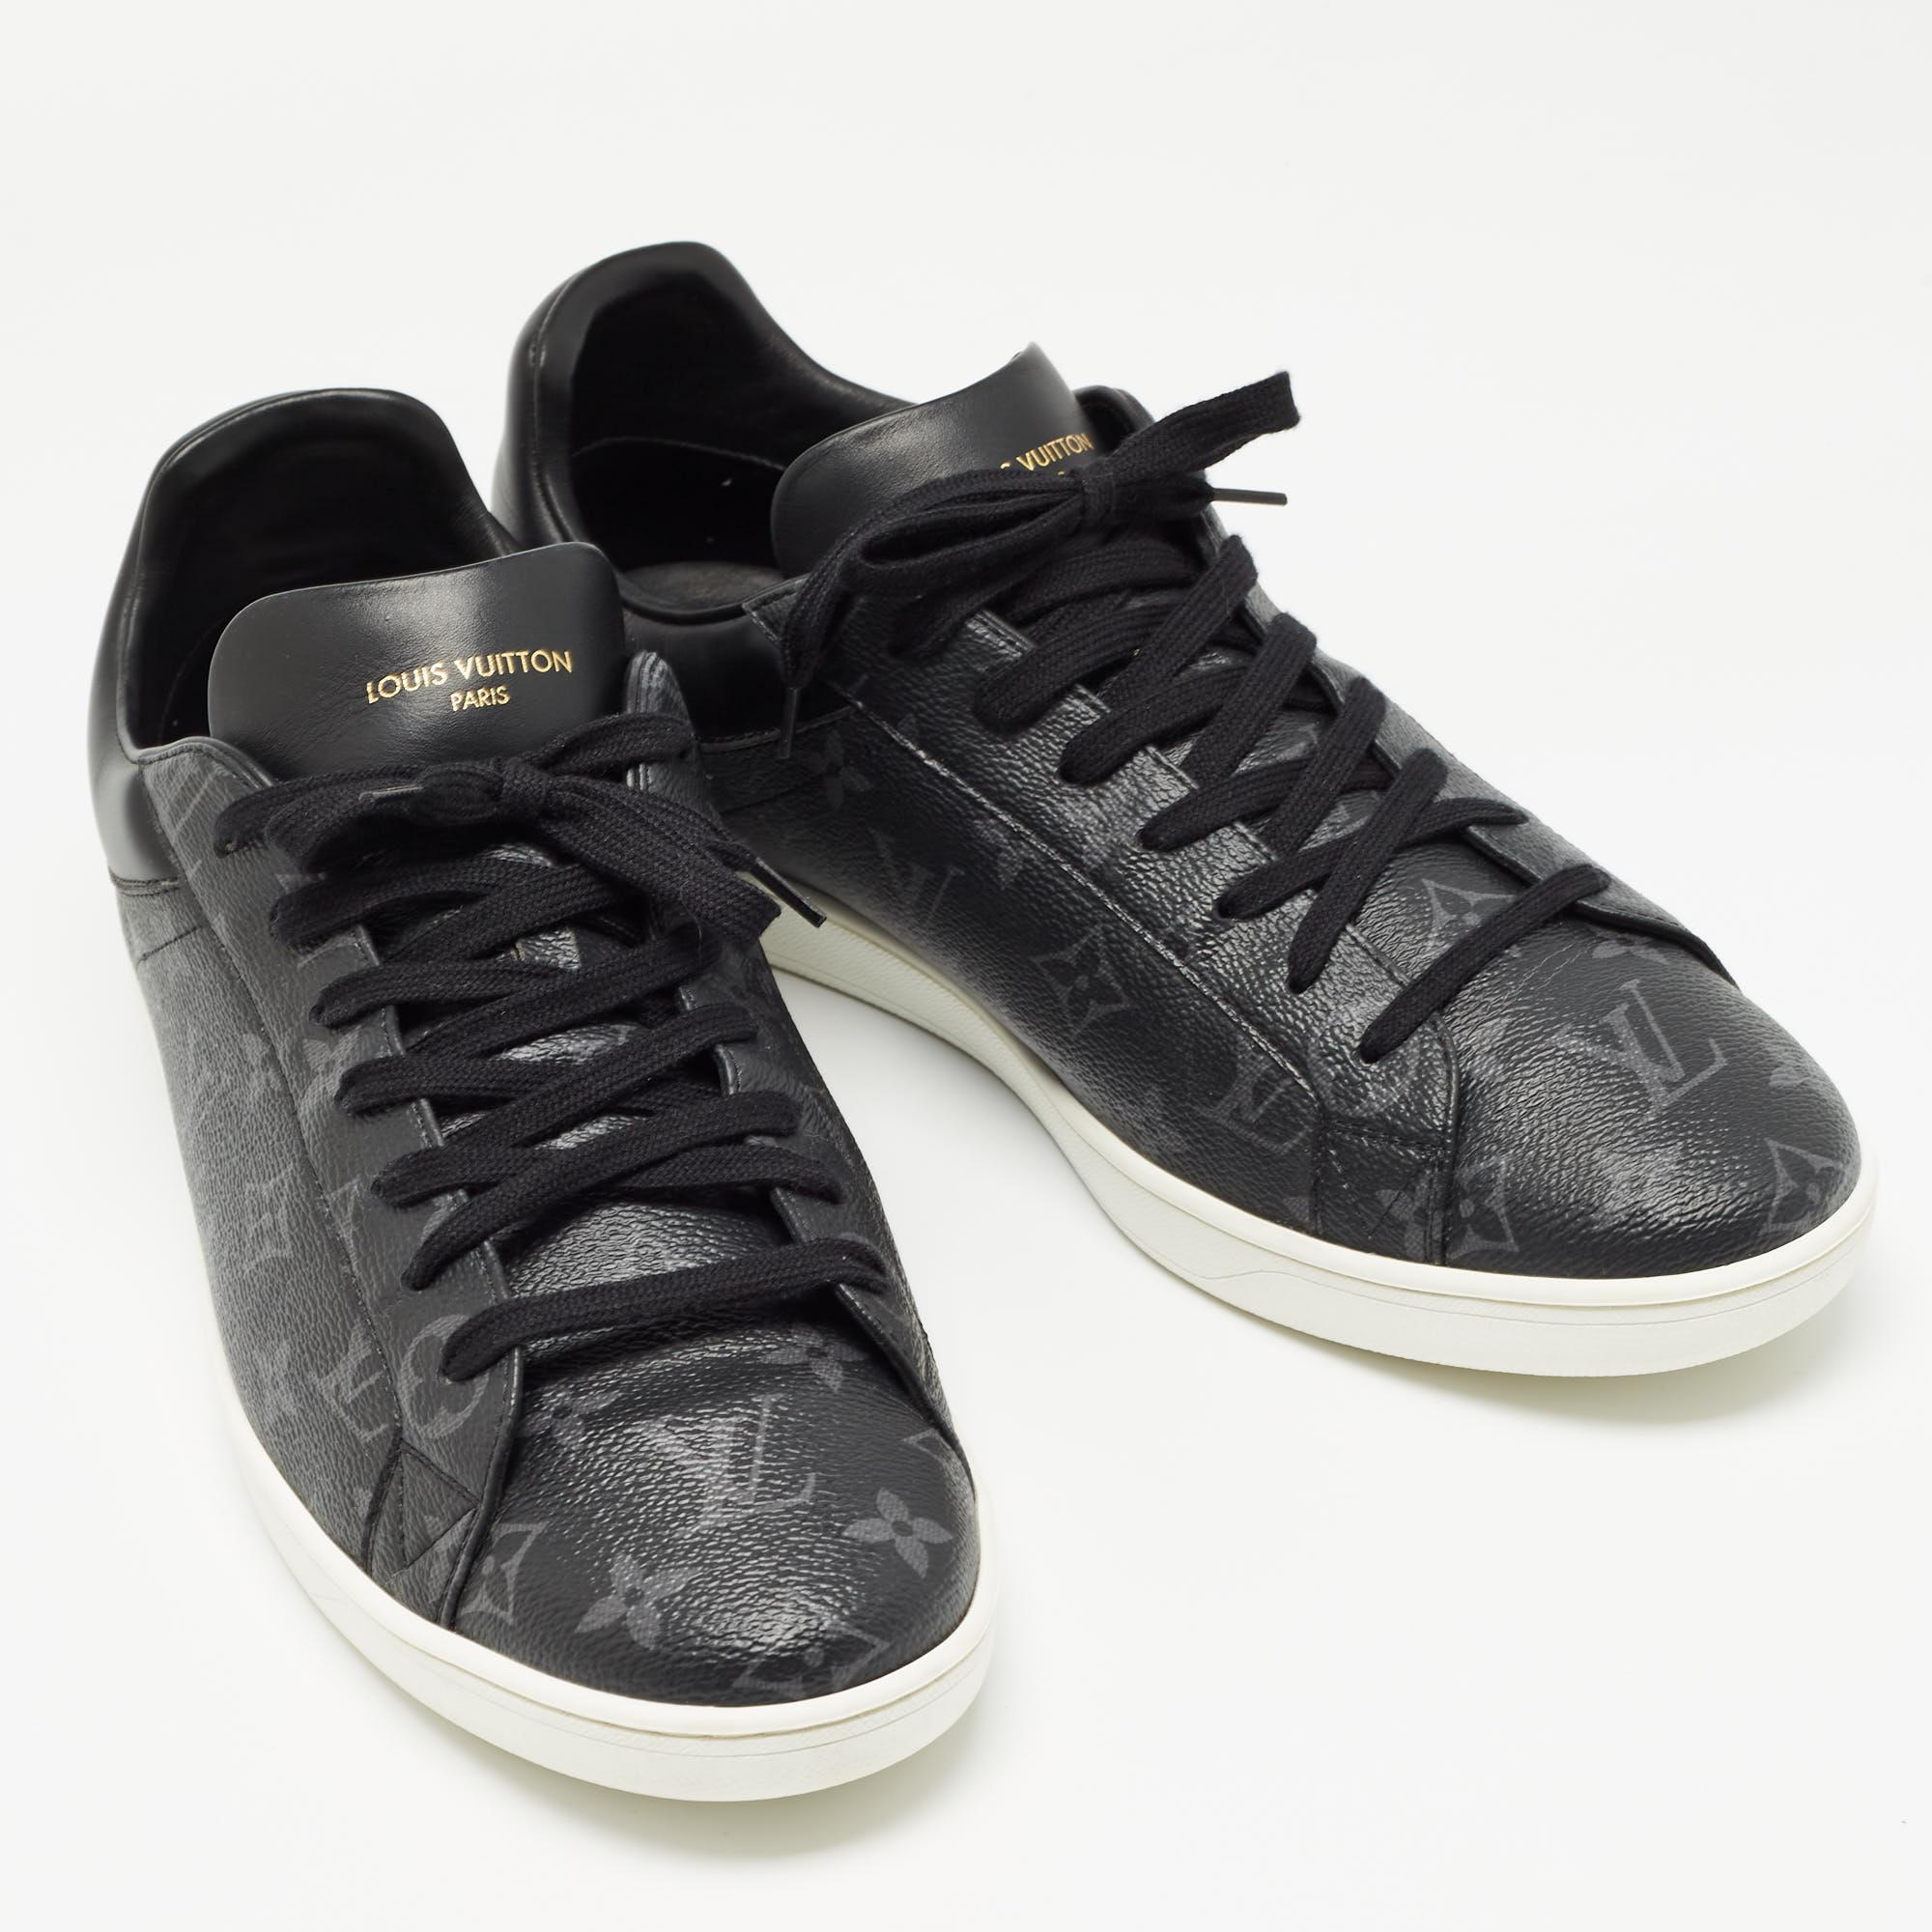 Louis Vuitton Monogram Eclipse Luxembourg Sneakers Size 46 For Sale 1